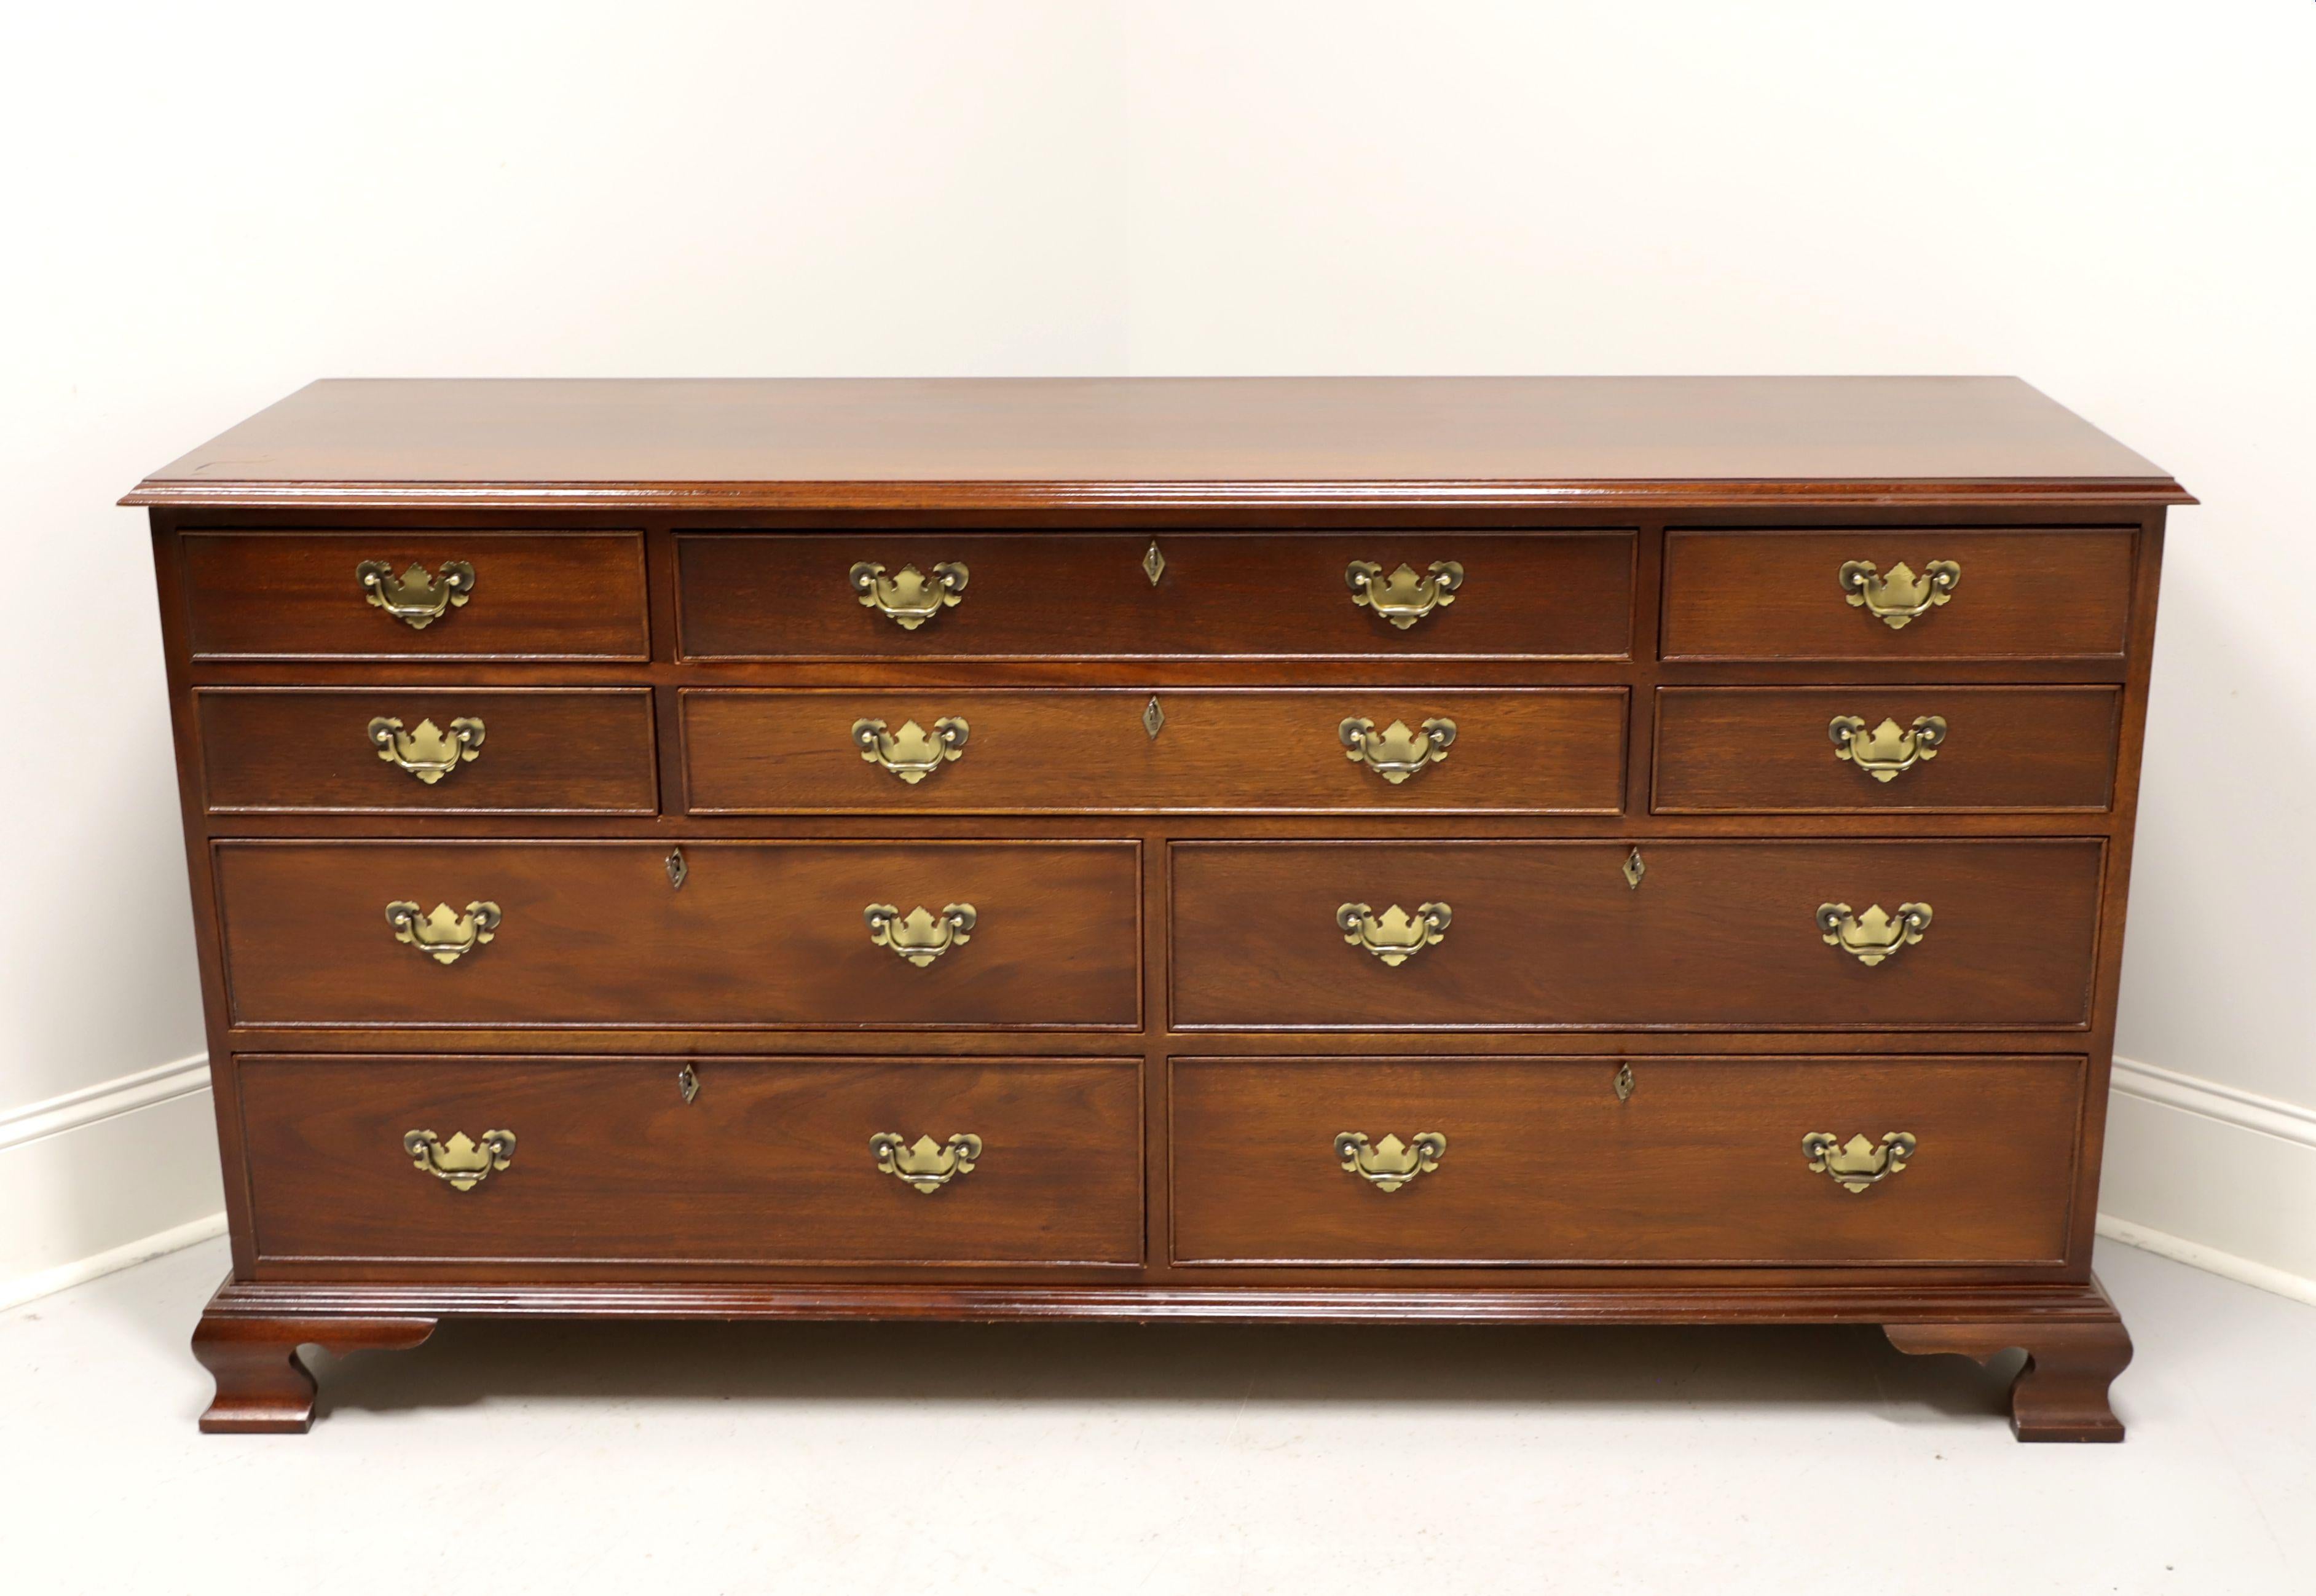 A Chippendale style dresser by top-quality furniture maker Craftique. Solid mahogany with brass hardware and ogee bracket feet. Ten various size drawers of dovetail construction, six of which are lockable. Includes six keys. Made in Mebane, North